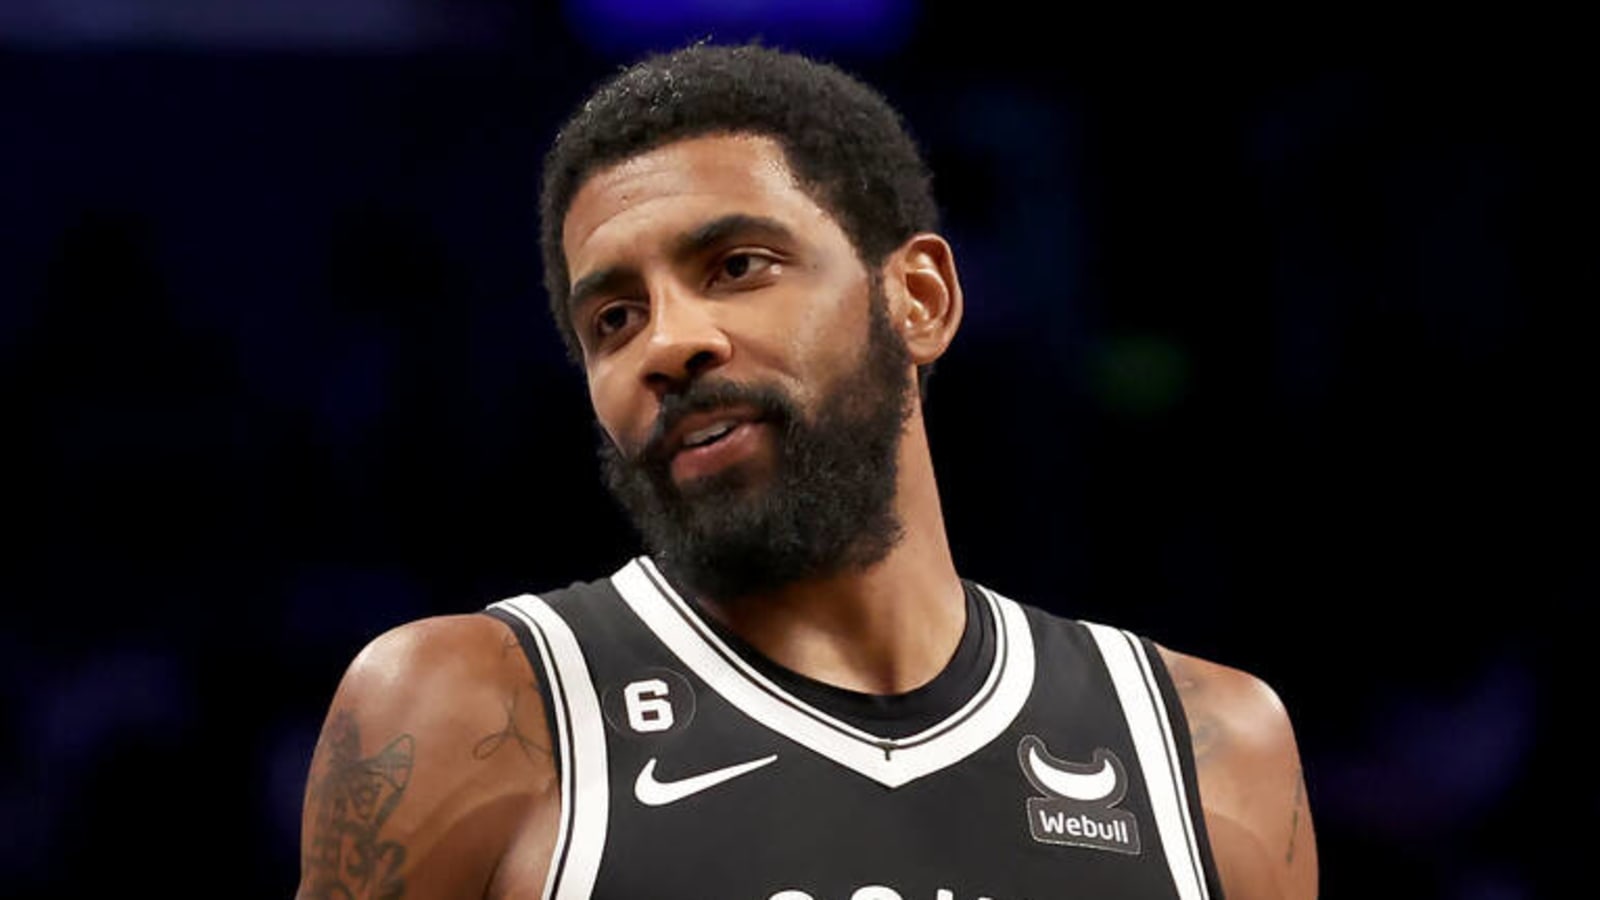 Kyrie Irving gives bizarre answer to questions on antisemitism